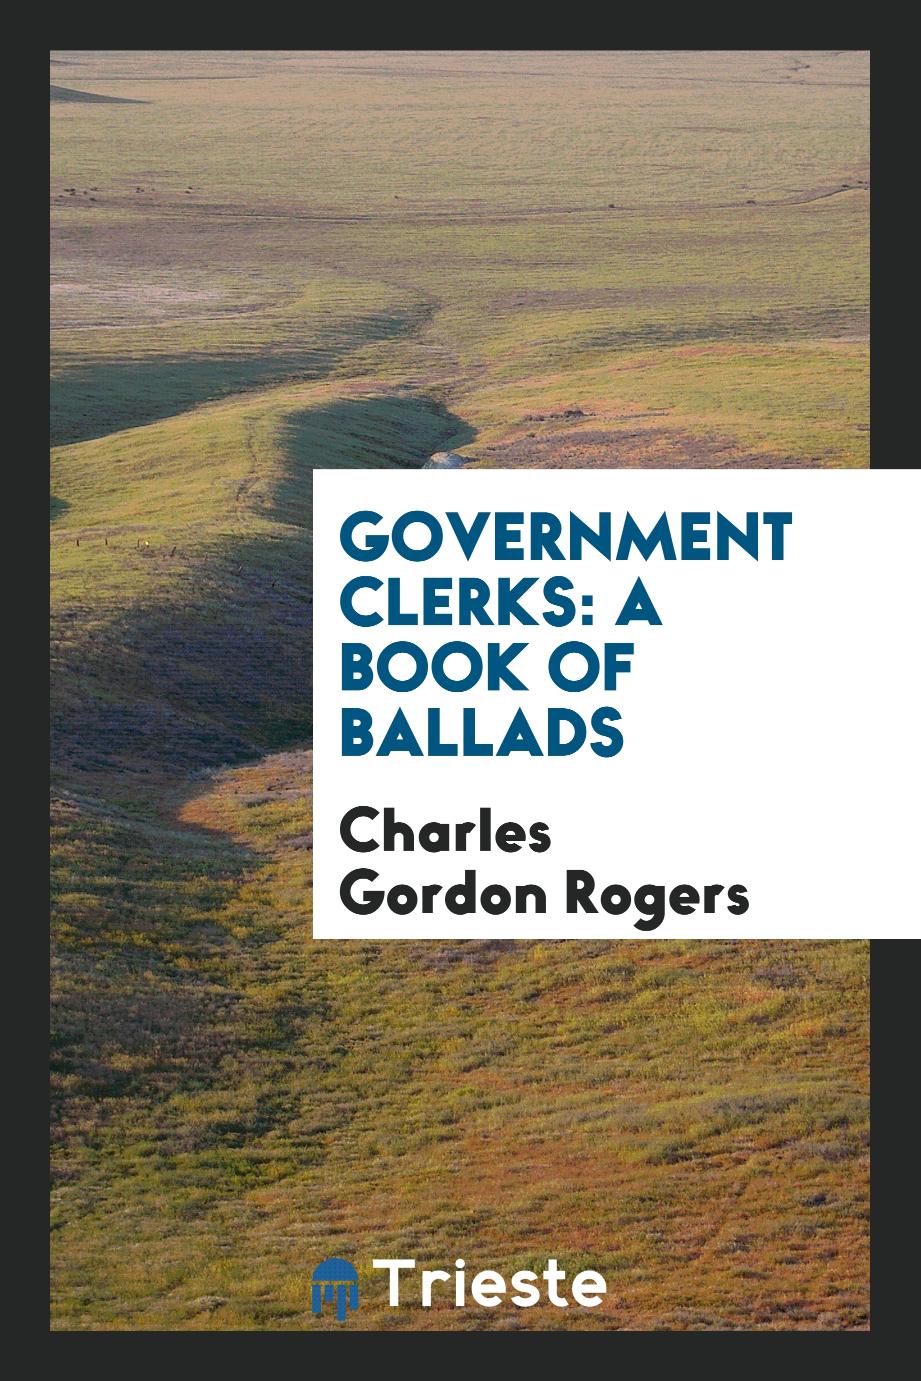 Charles Gordon Rogers - Government Clerks: A Book of Ballads